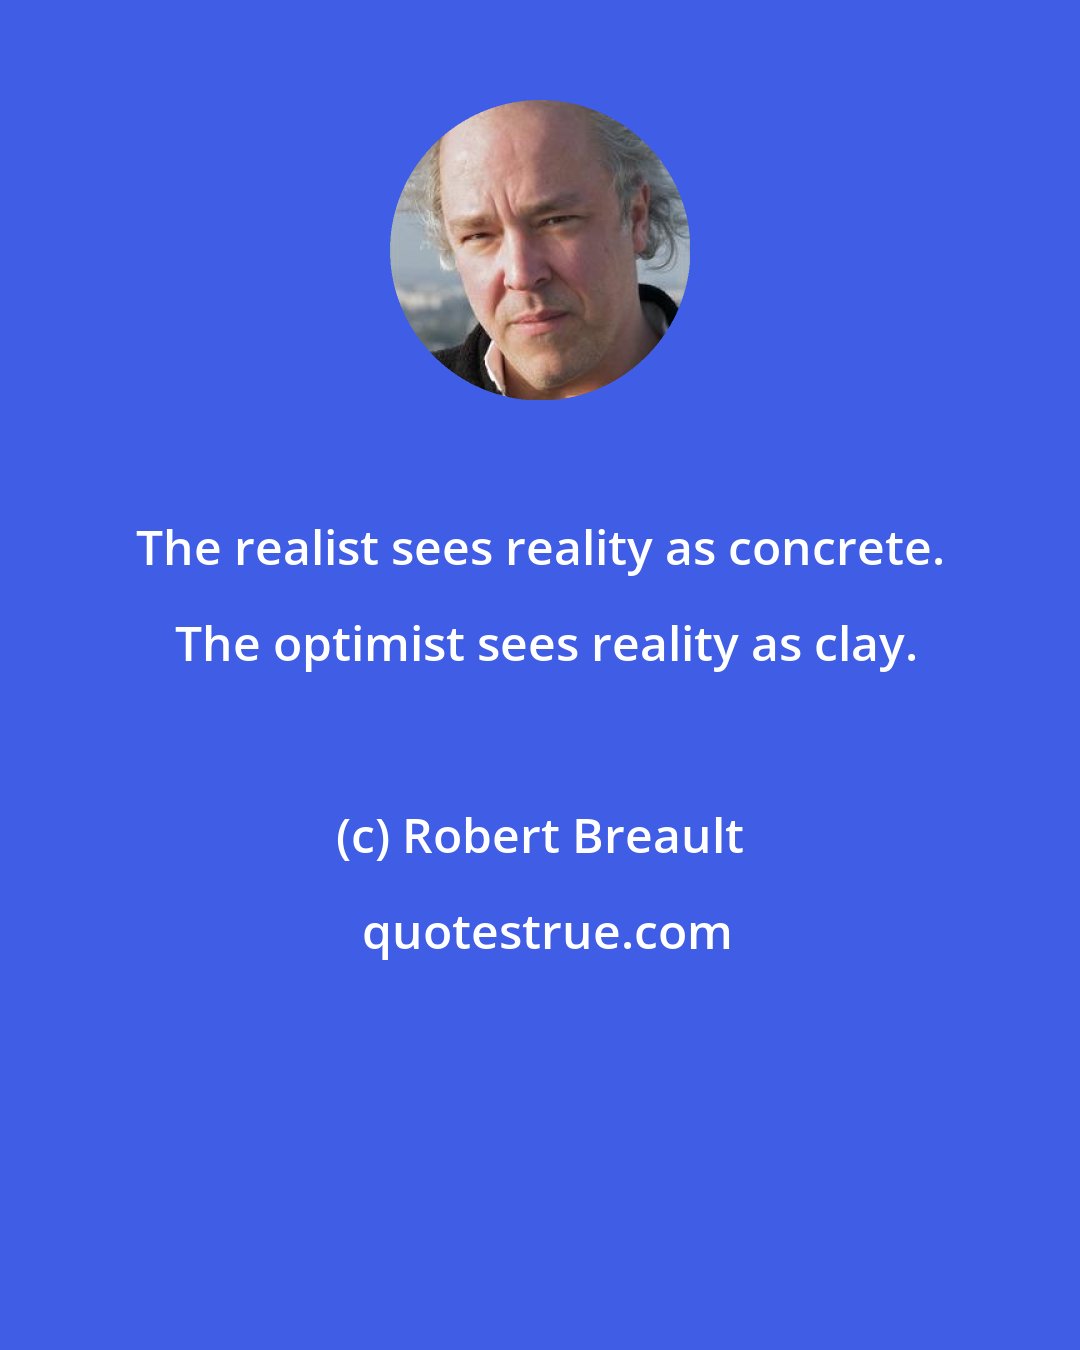 Robert Breault: The realist sees reality as concrete.  The optimist sees reality as clay.